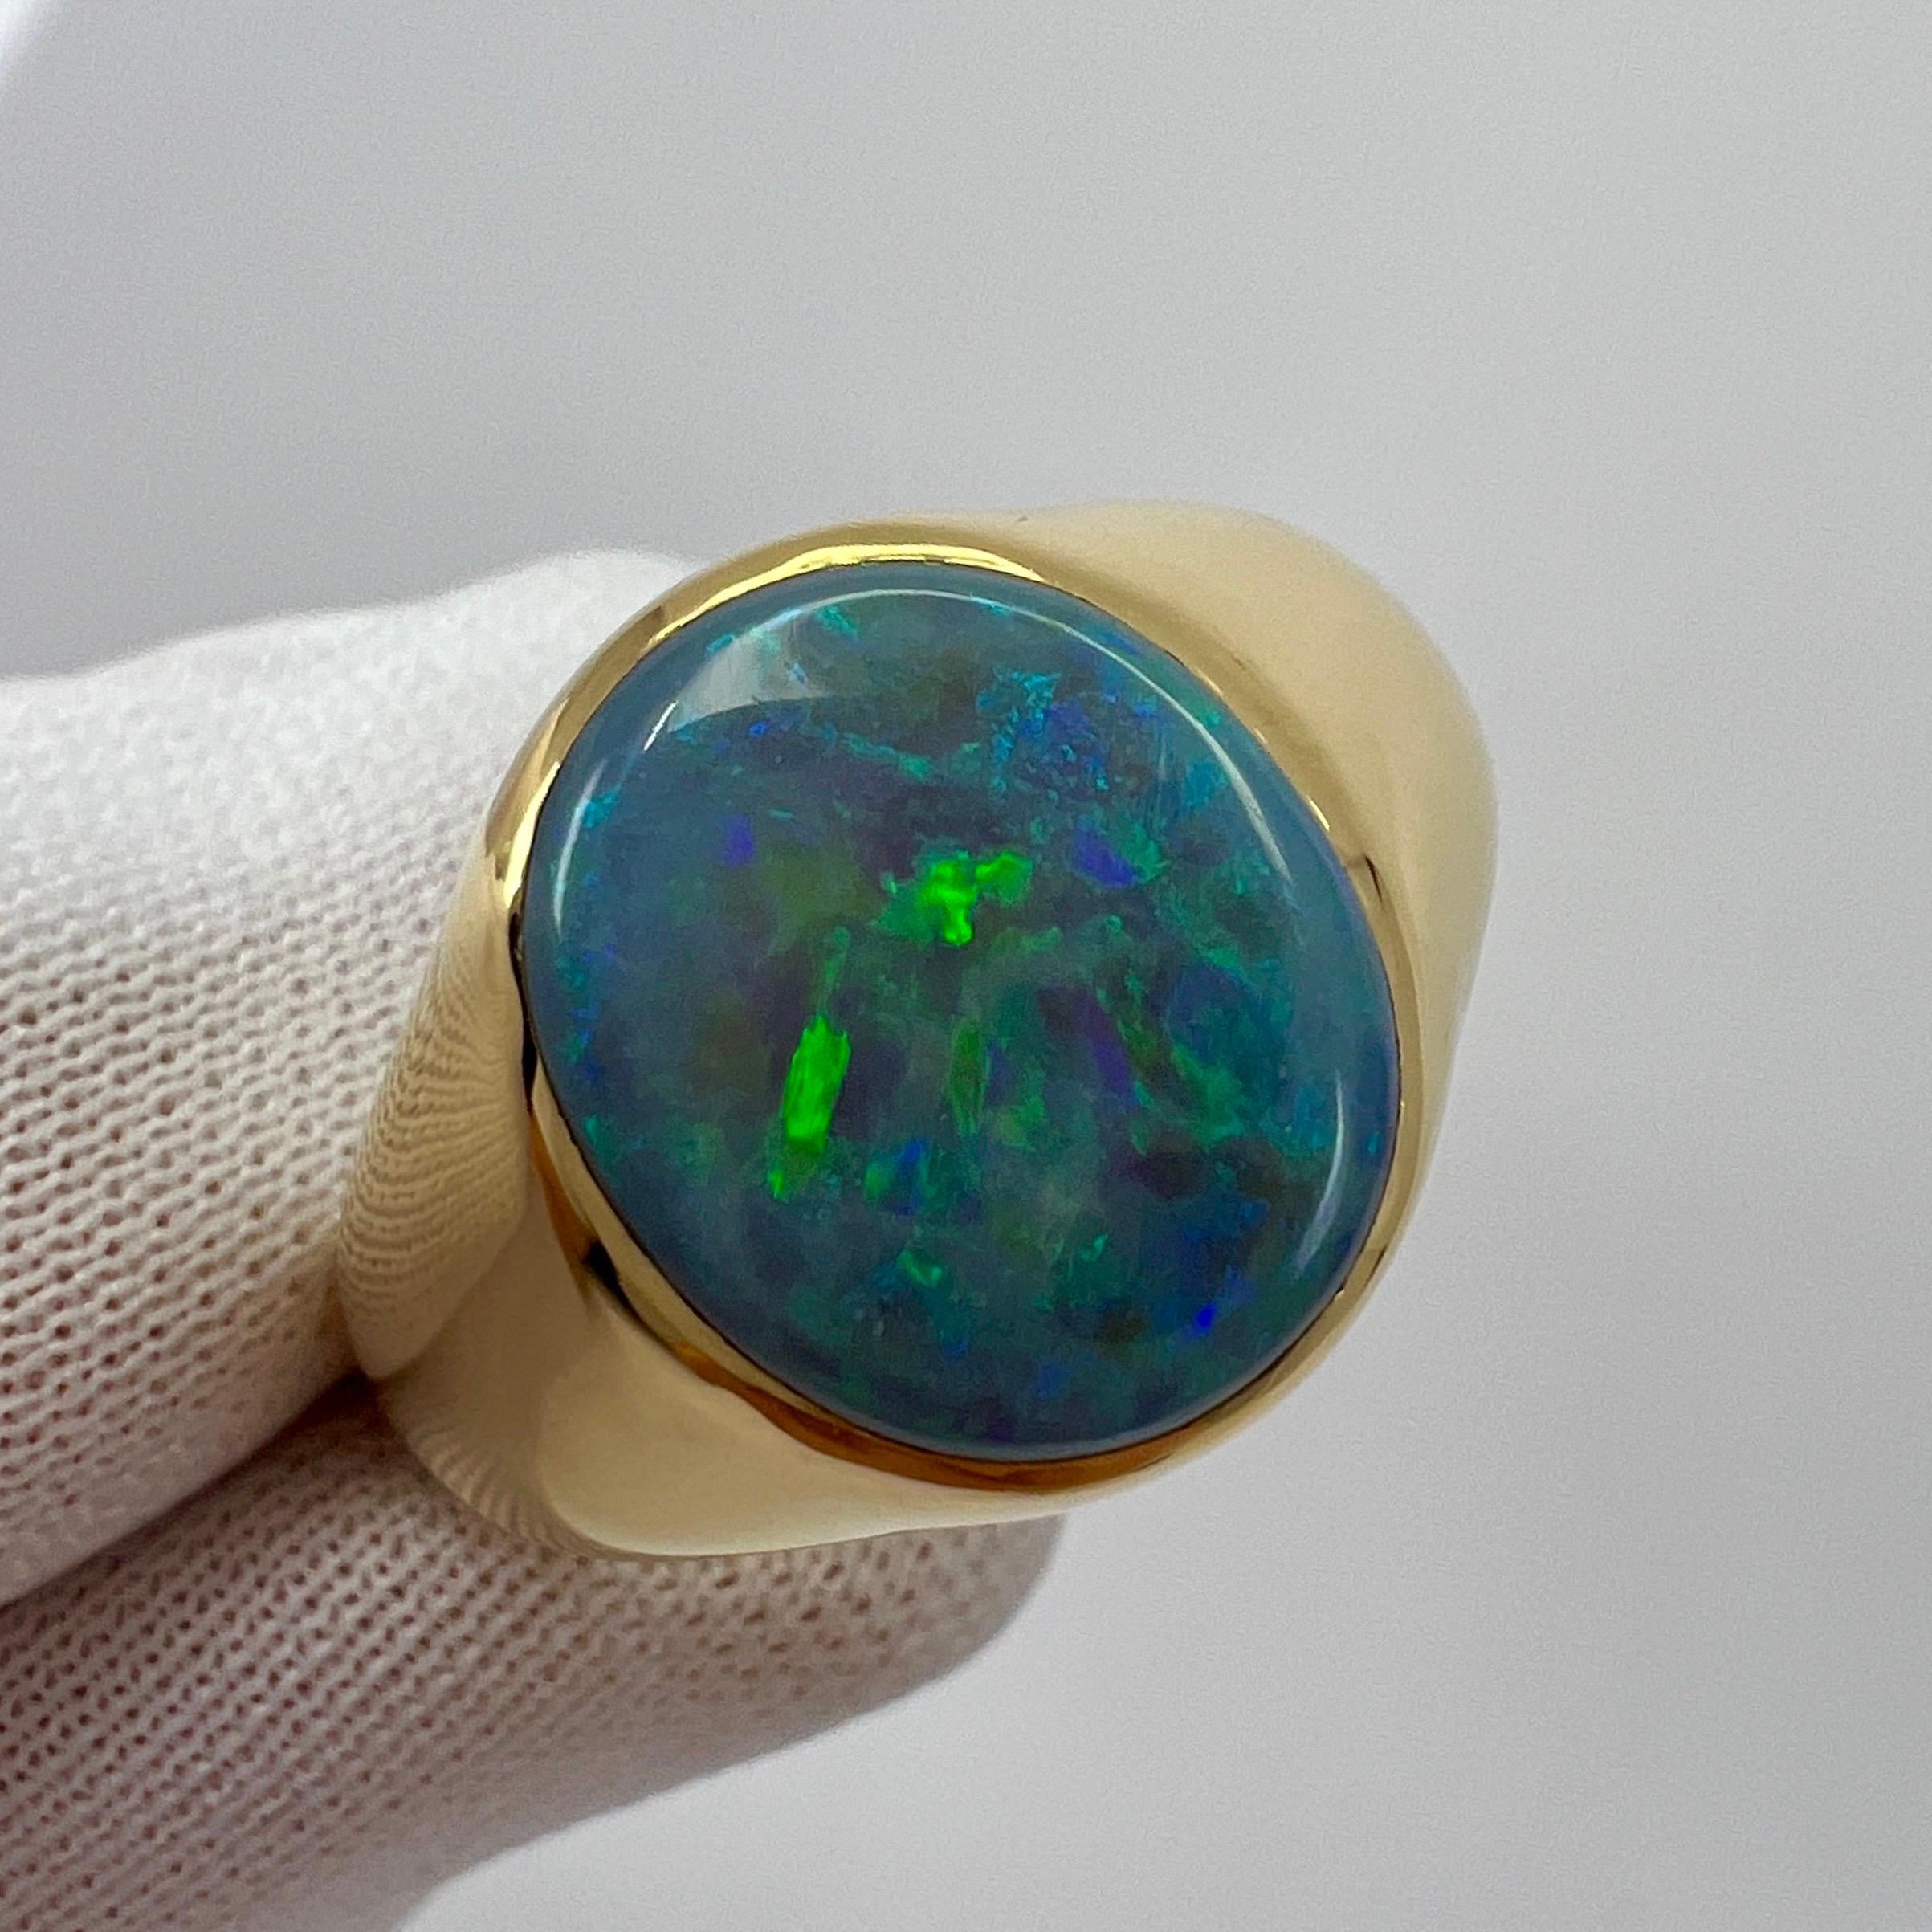 Fine Australian Lightening Ridge Black Opal 18k Yellow Gold Signet Ring.

A stunning 3.04 carat natural black opal with a beautiful play of colour and an excellent oval cabochon cut. Set in a bespoke made 18k yellow gold rubover bezel signet ring.